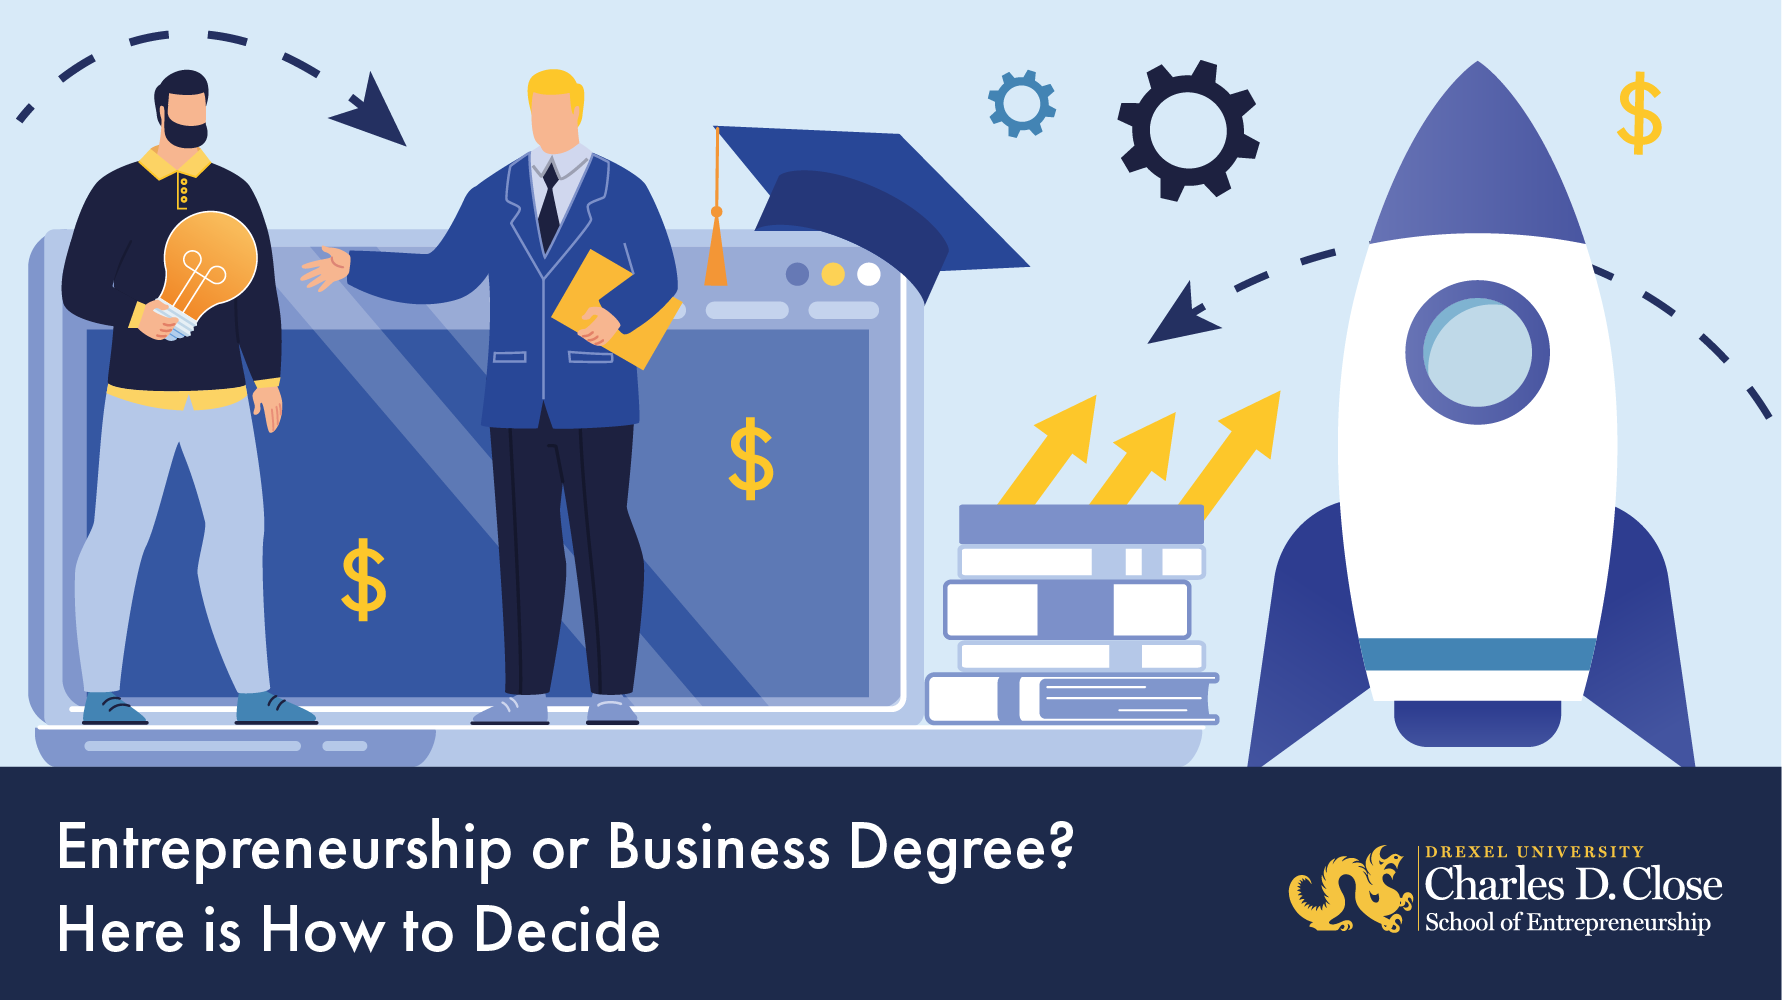 How to decide between entrepreneurship or business degree